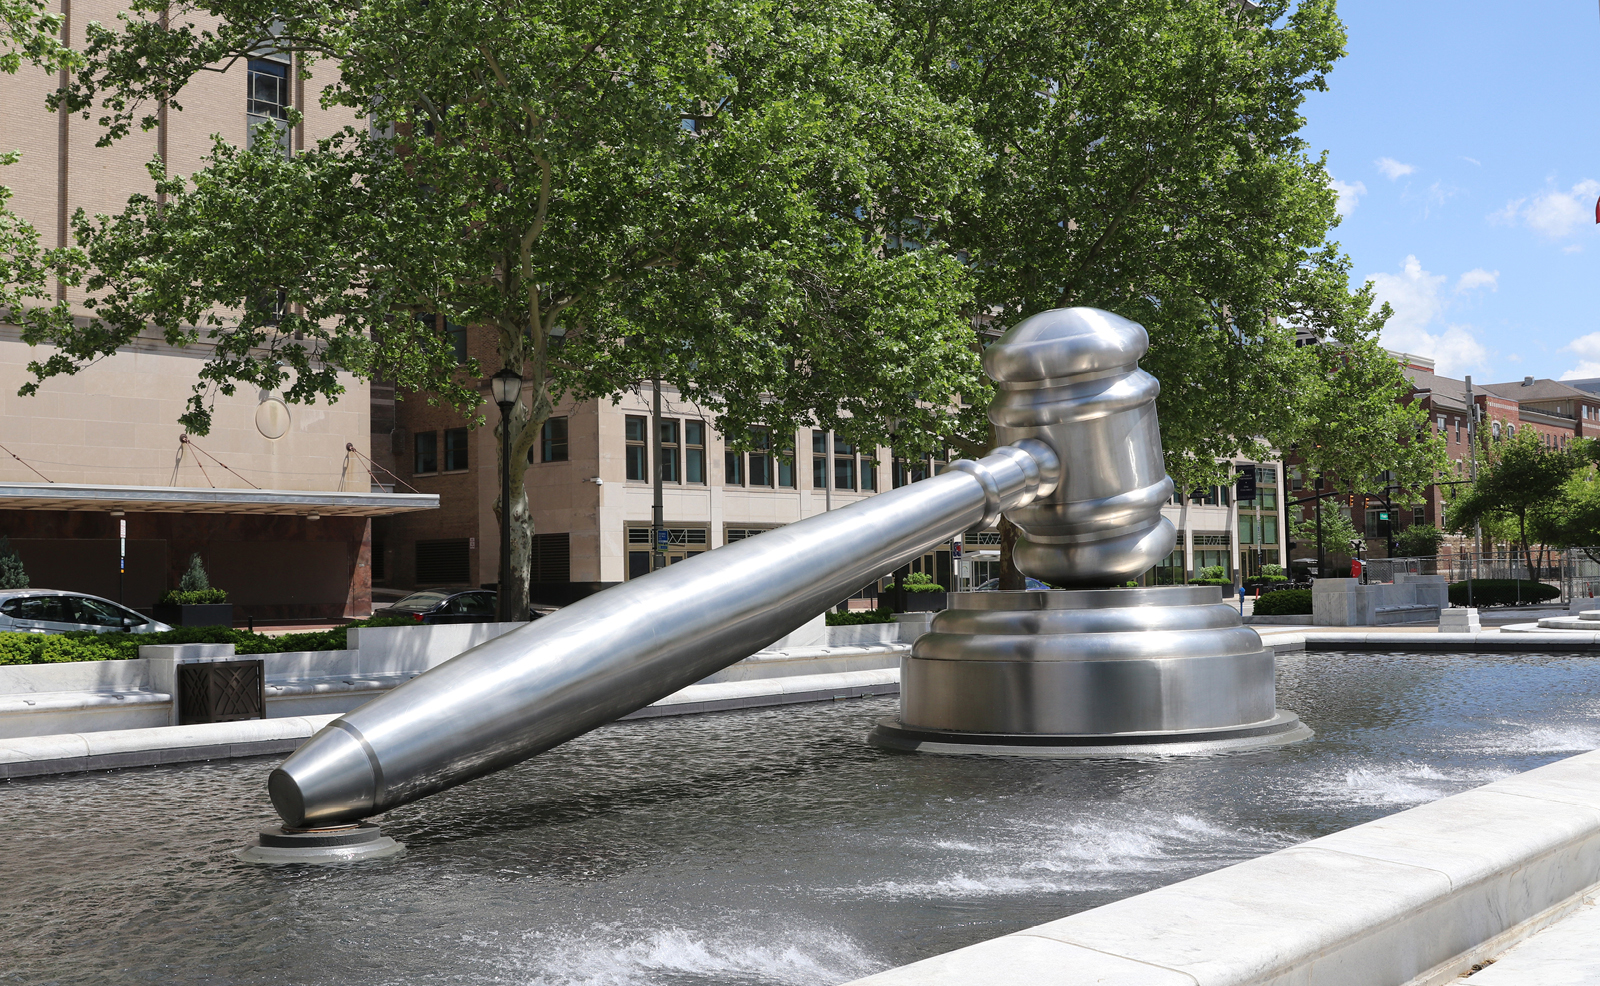 Image of the large stainless steel gavel located in the south reflecting pool of the Thomas J. Moyer Ohio Judicial Center